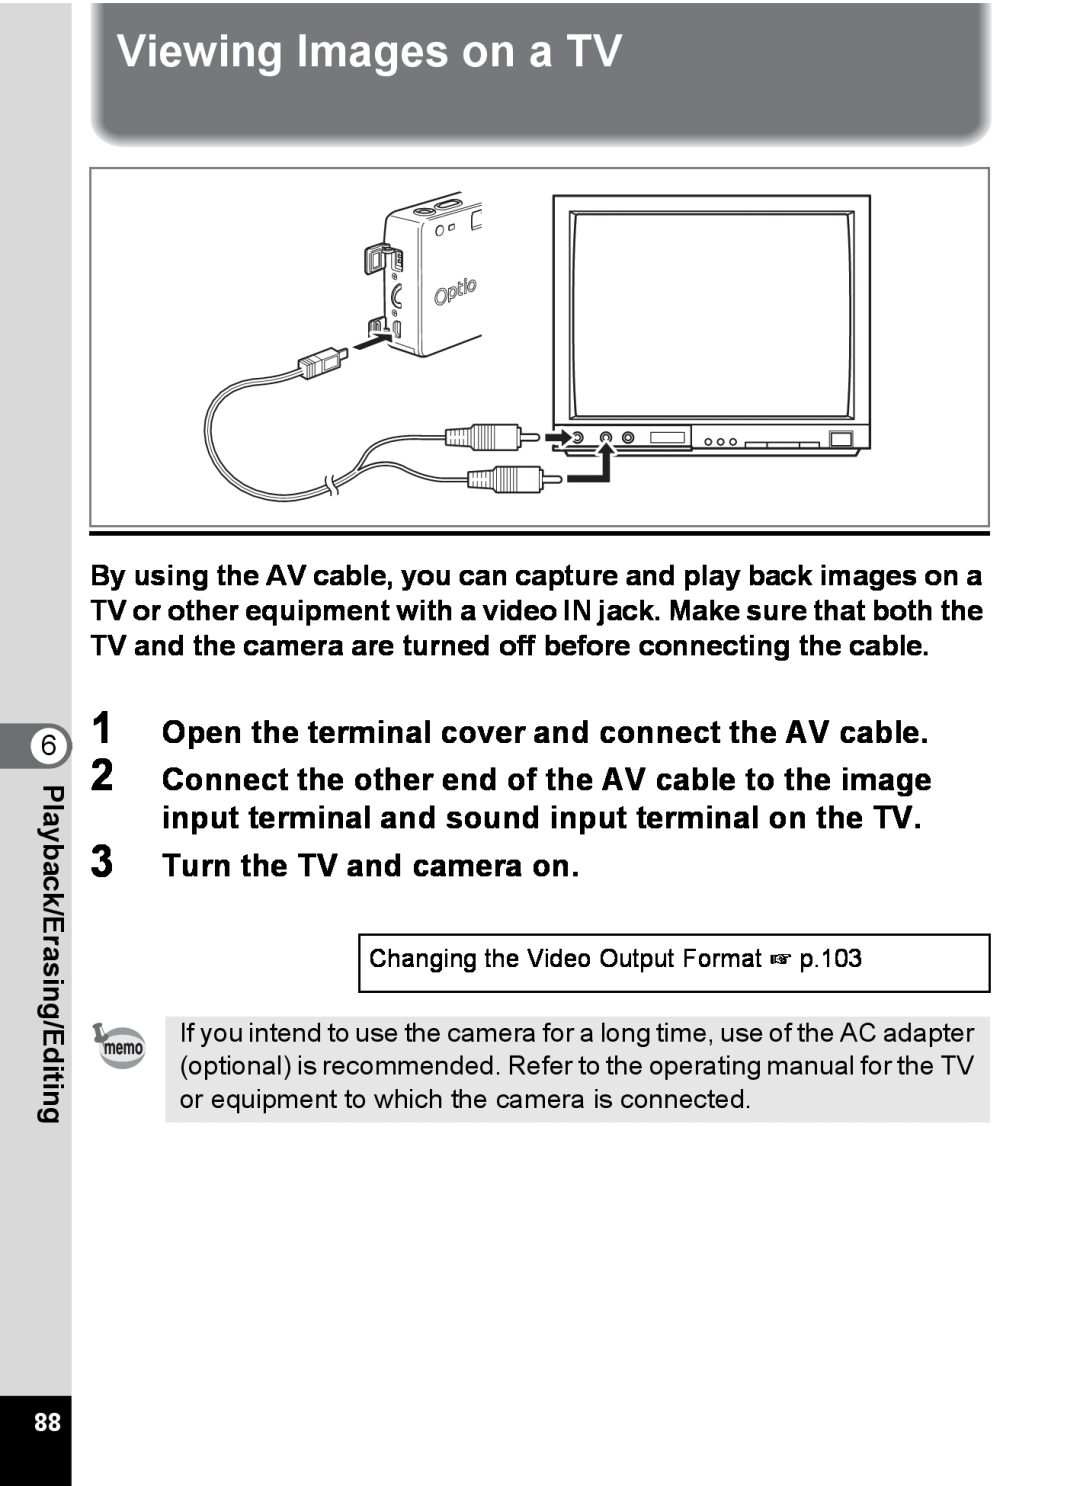 Pentax S4 manual Viewing Images on a TV, Open the terminal cover and connect the AV cable, Turn the TV and camera on 